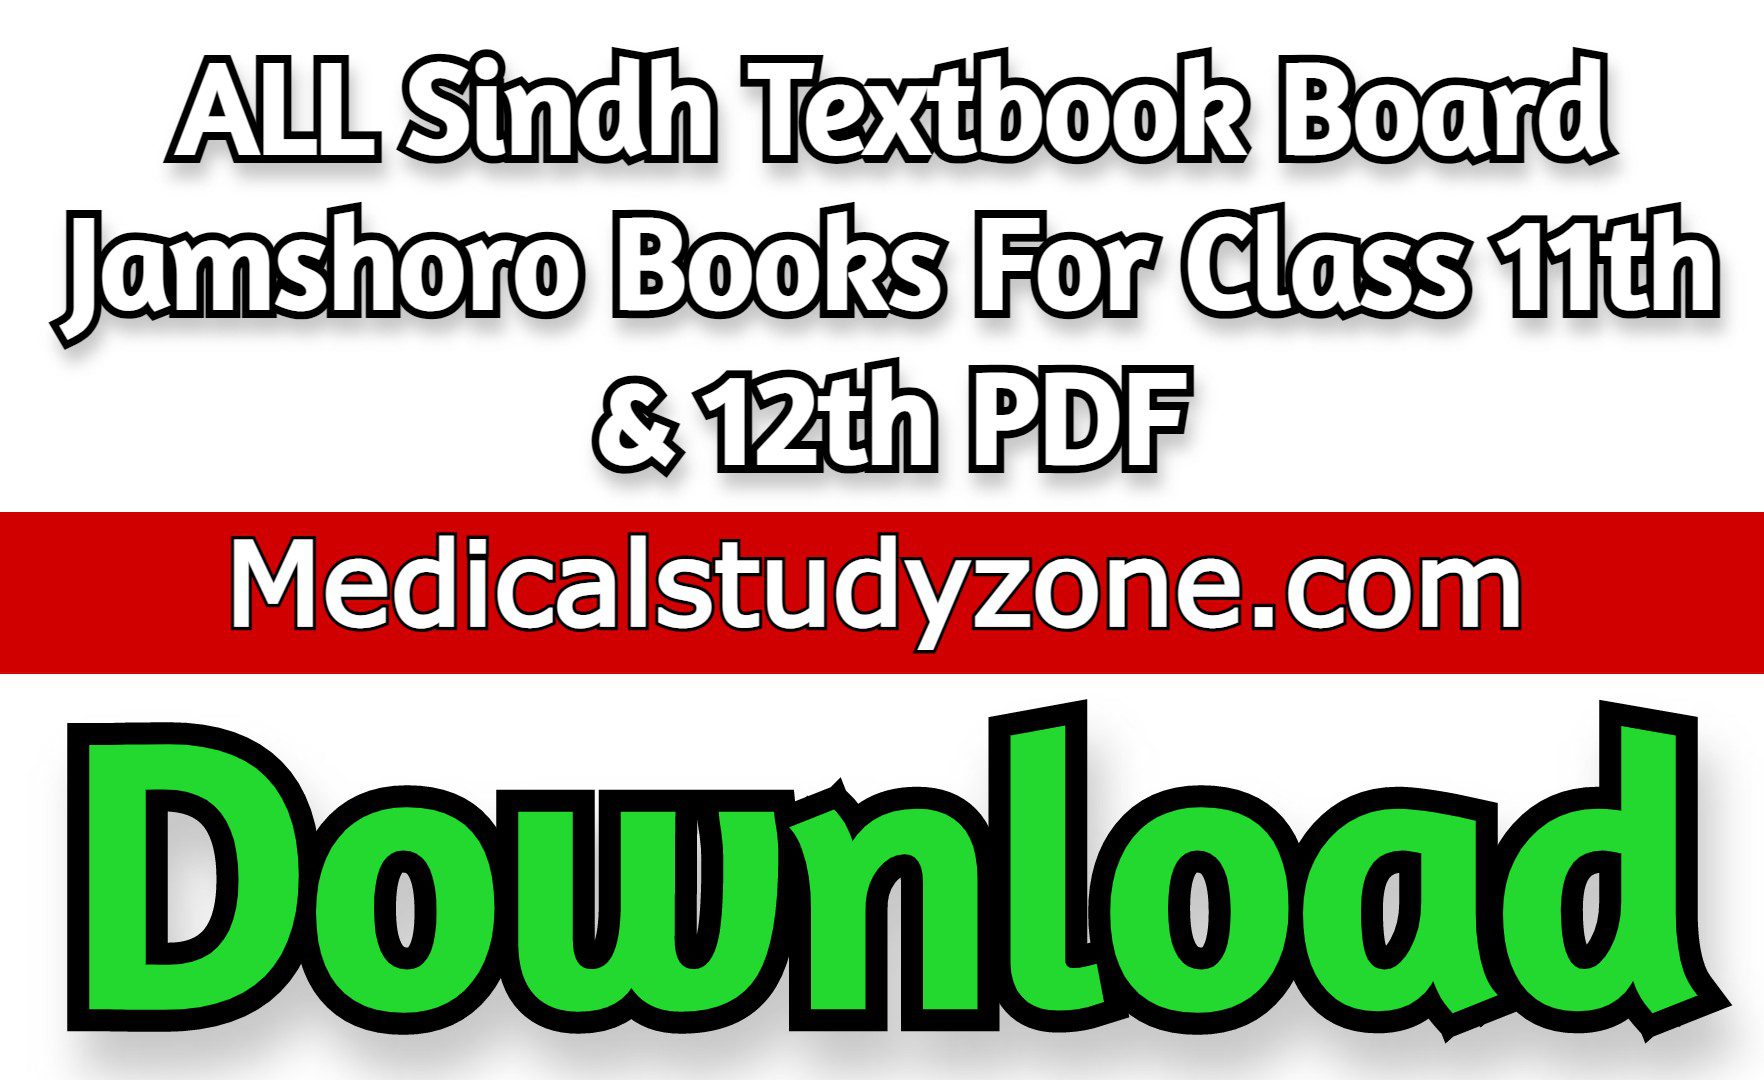 ALL Sindh Textbook Board Jamshoro Books For Class 11th & 12th PDF Free Download